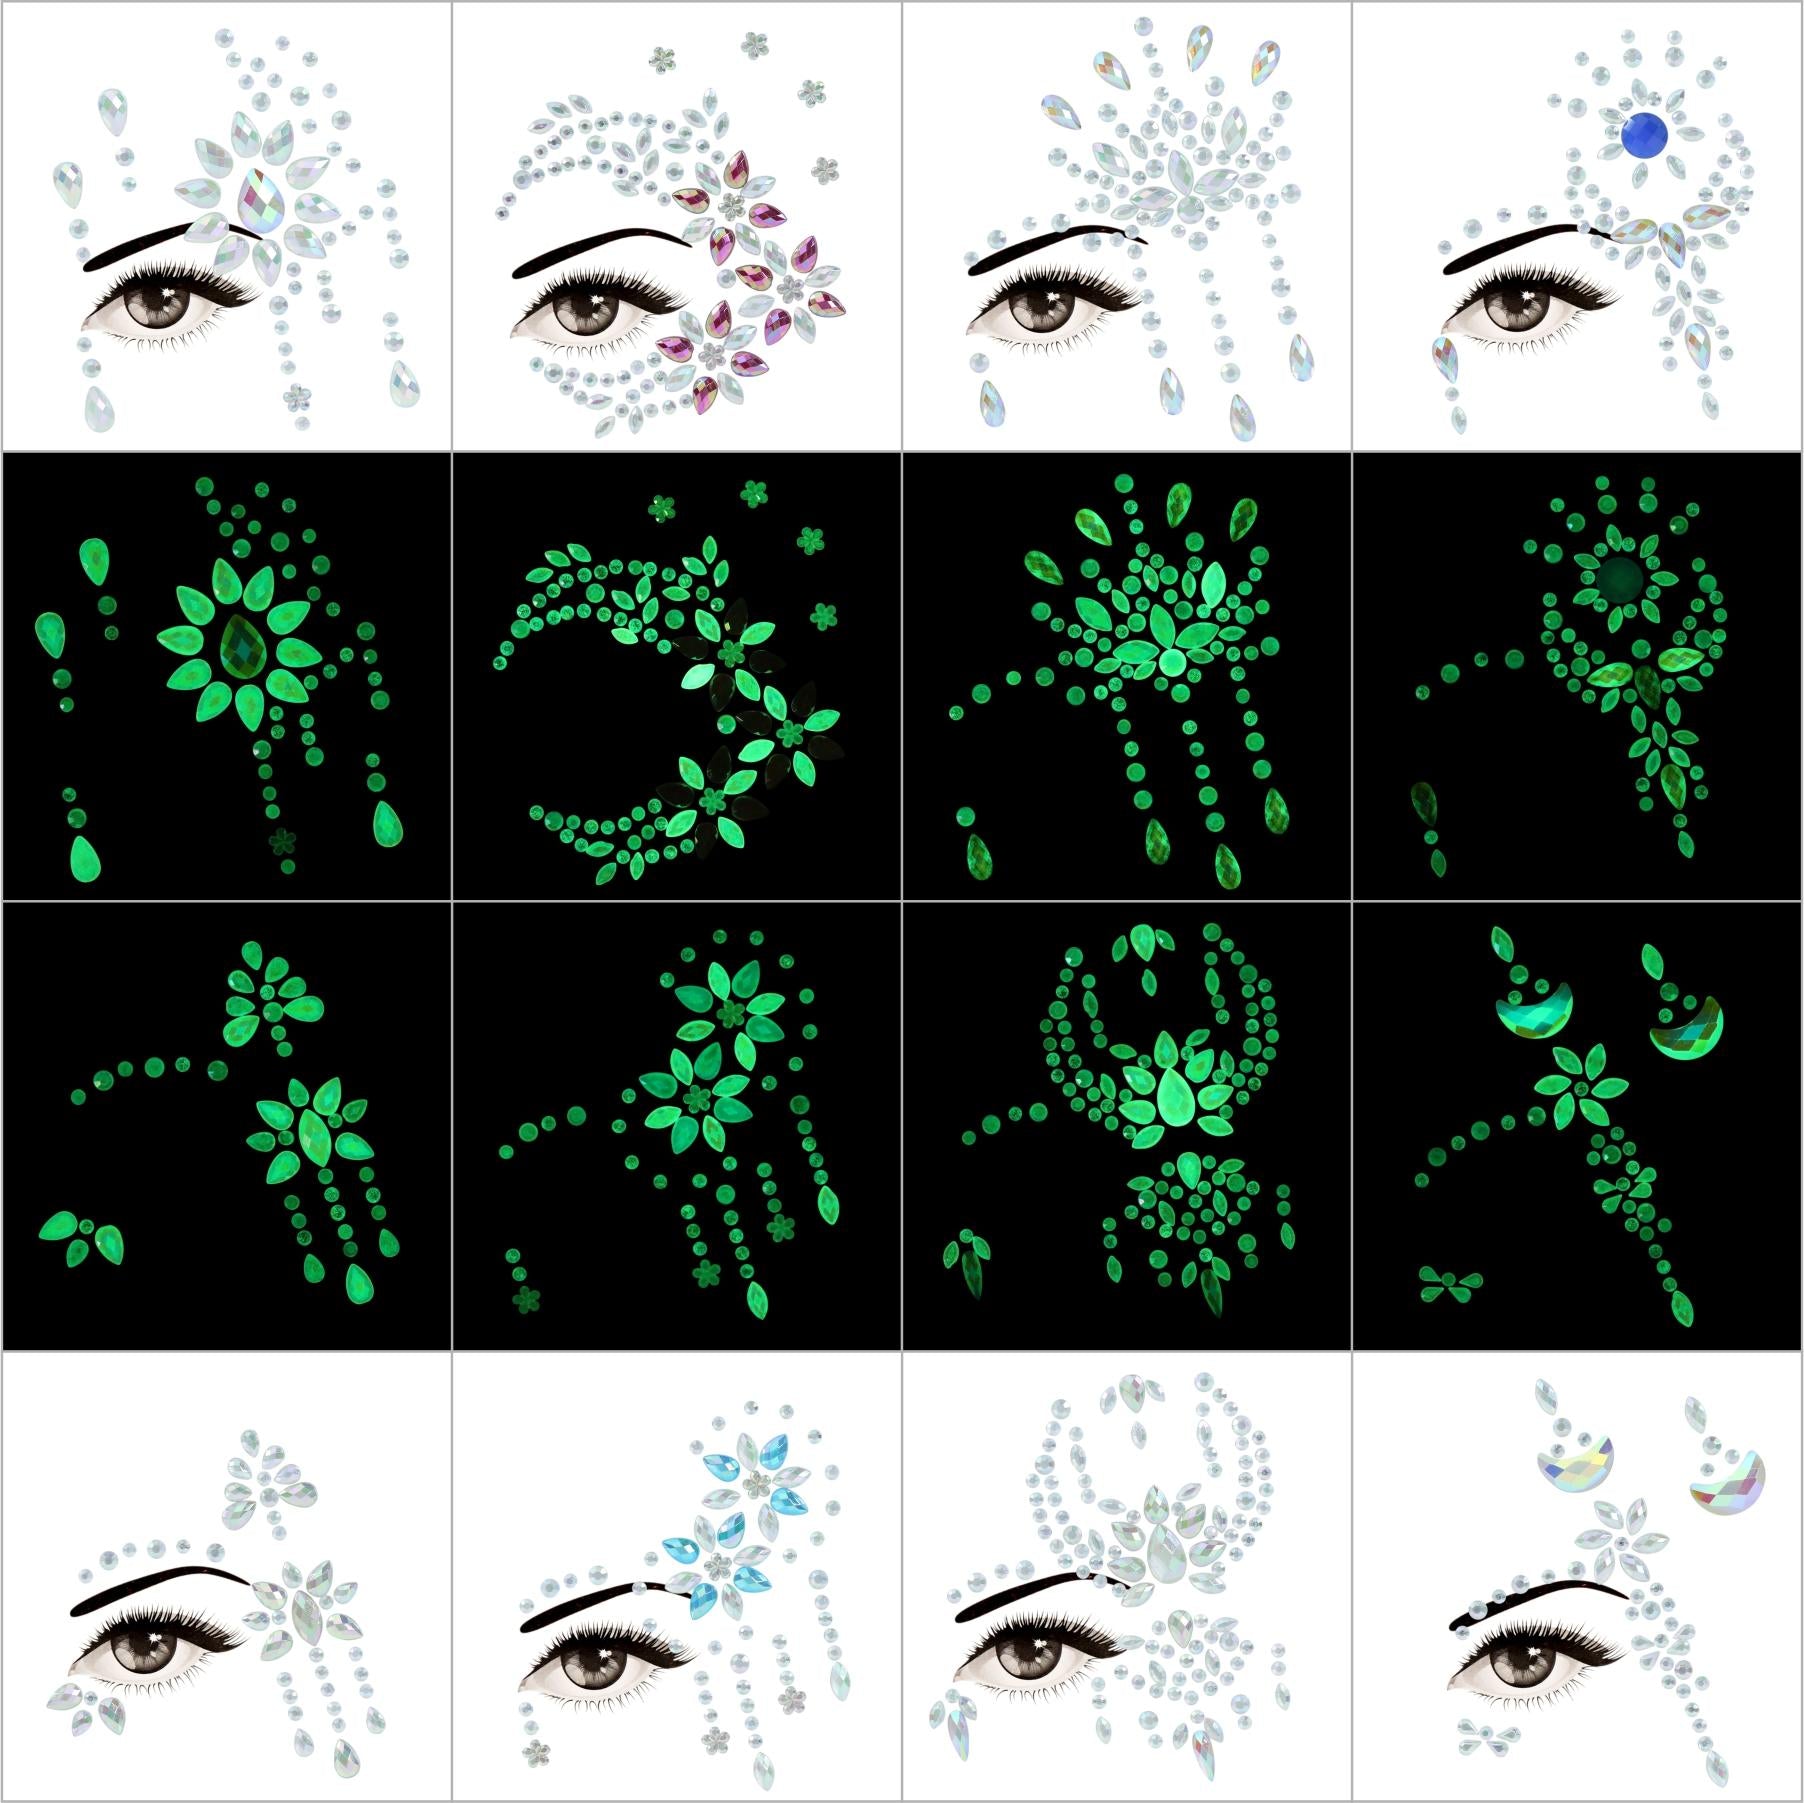 Face Jewels-6 Sets Eye Face Gems Stickers and 10g Chunky Body Glitter –  WIDELYTOY